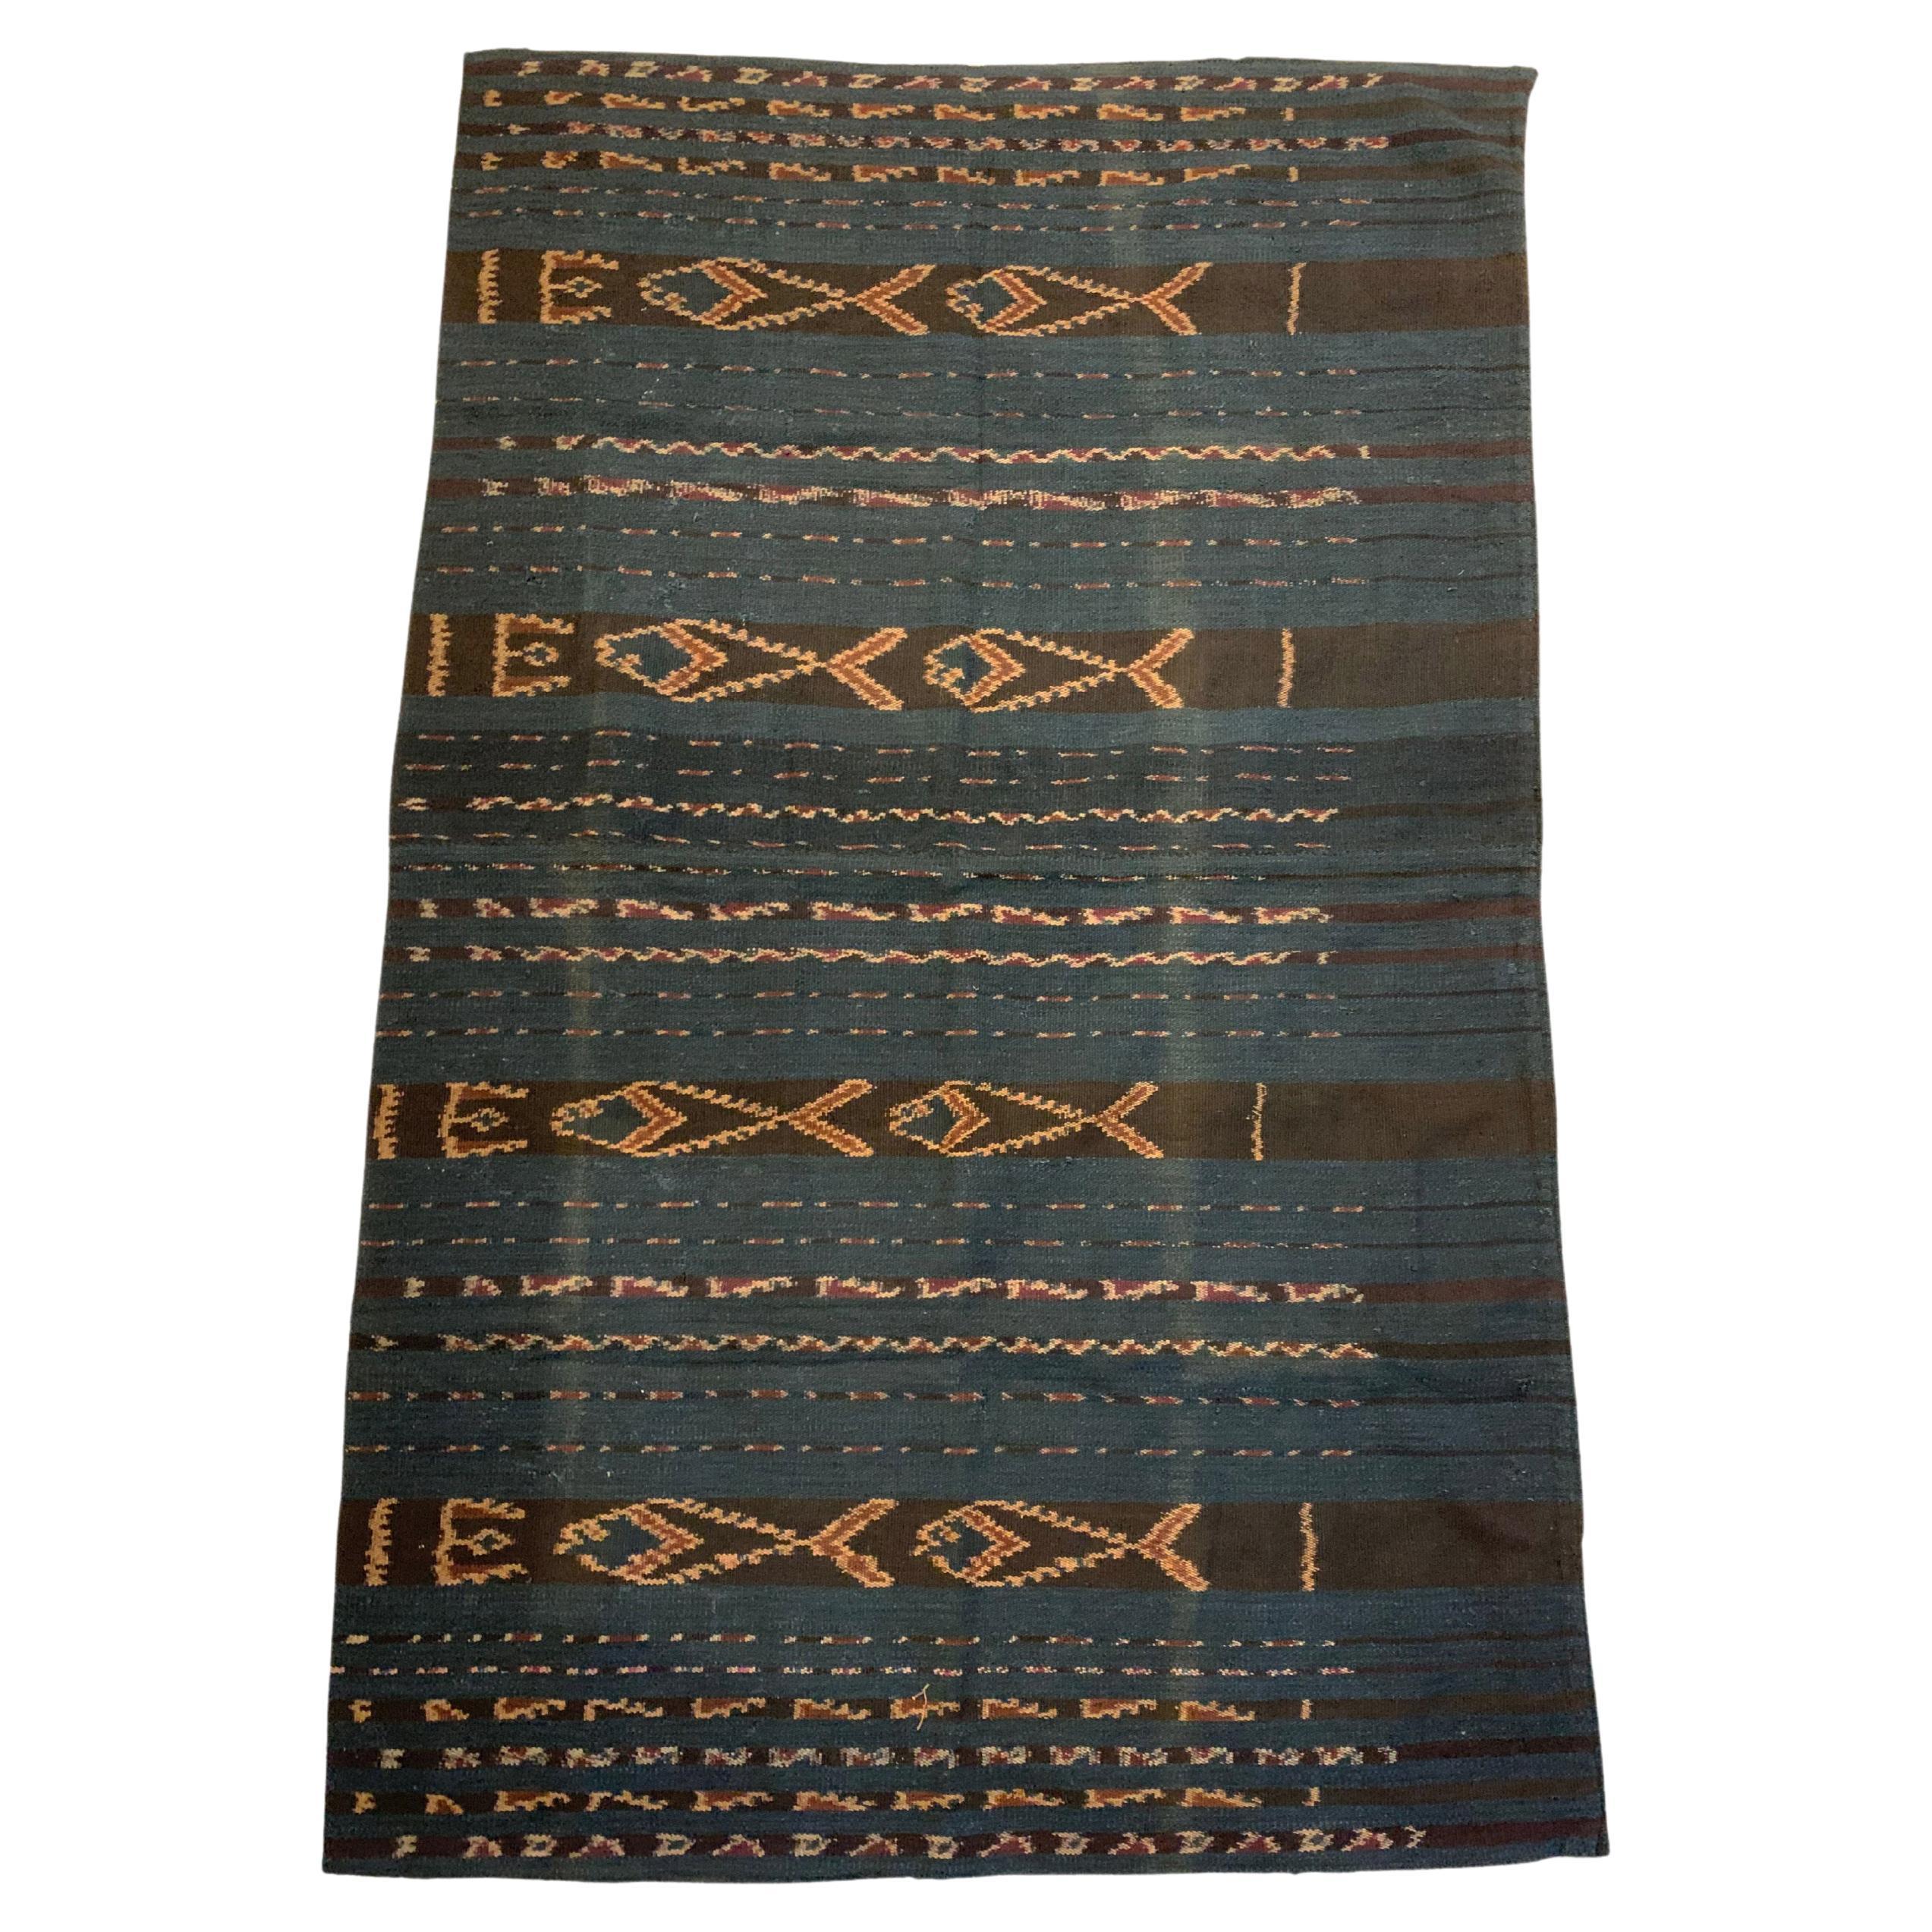 Ikat Textile from Maluku, Indonesia with Stunning Naturally Coloured Dye